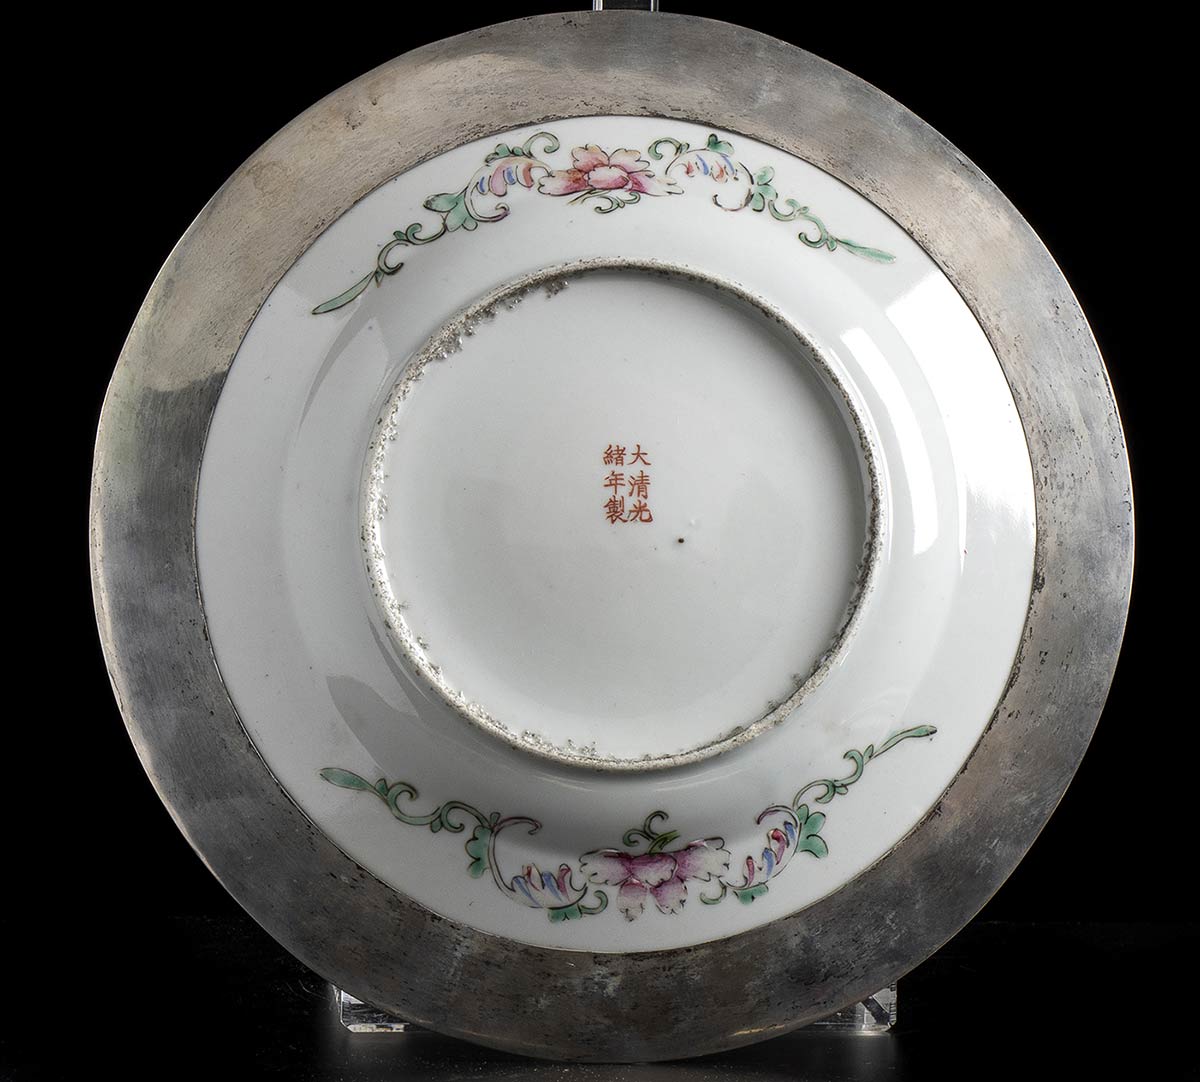 A POLYCHROME PORCELAIN DISH WITH SILVER MOUNT AND SPOONthe dish China, Guangxu mark; the mount a - Image 2 of 3